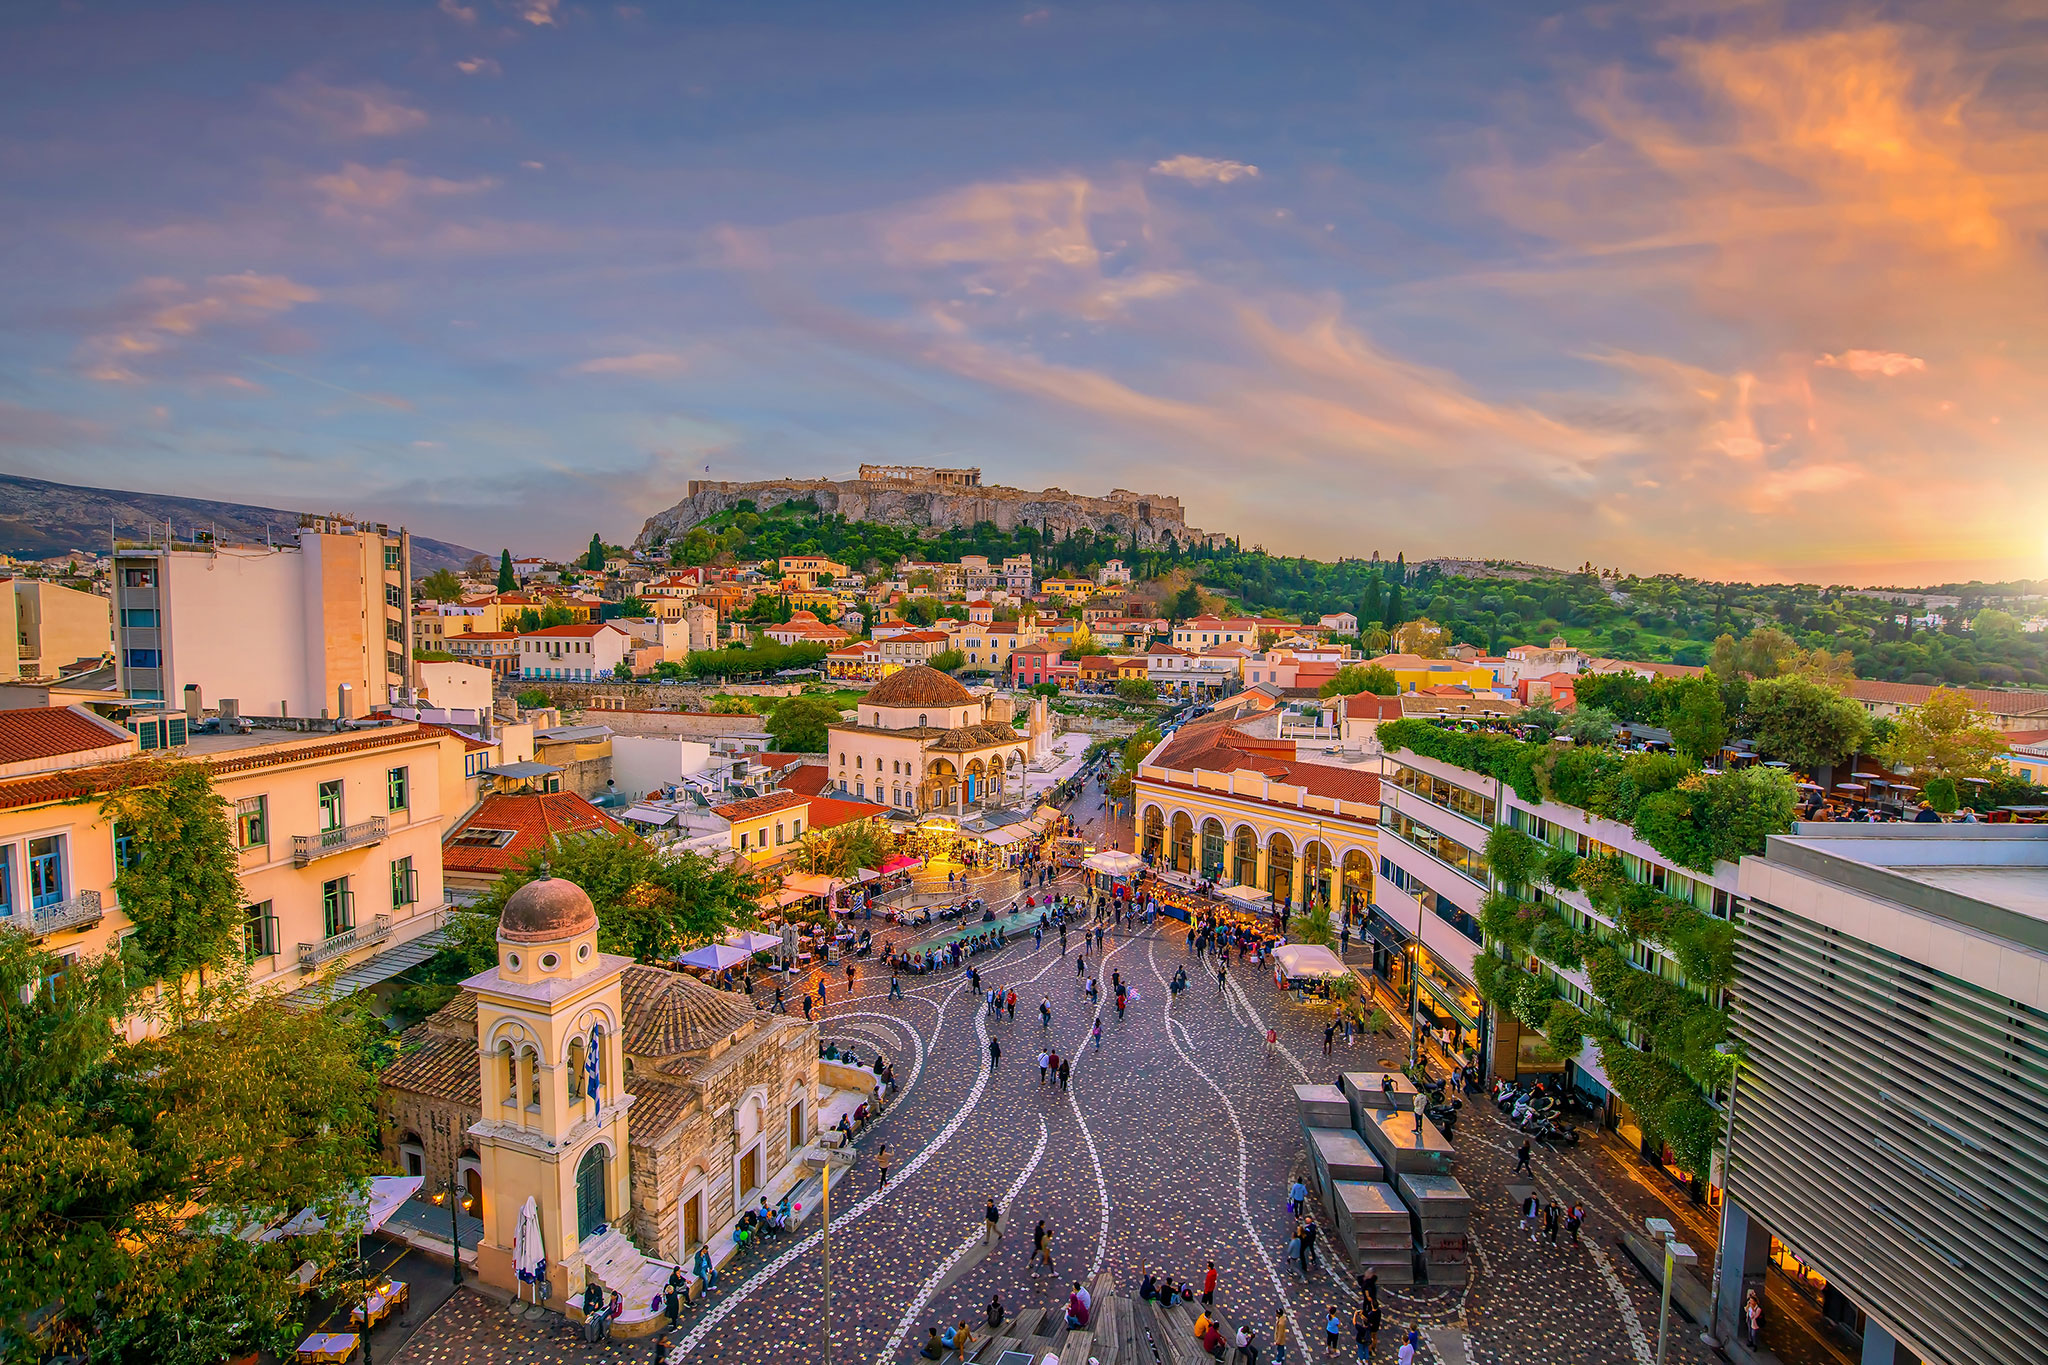 Sunset over Athens, showcasing the city’s skyline with the Acropolis in the background and the lively Monastiraki Square filled with people.